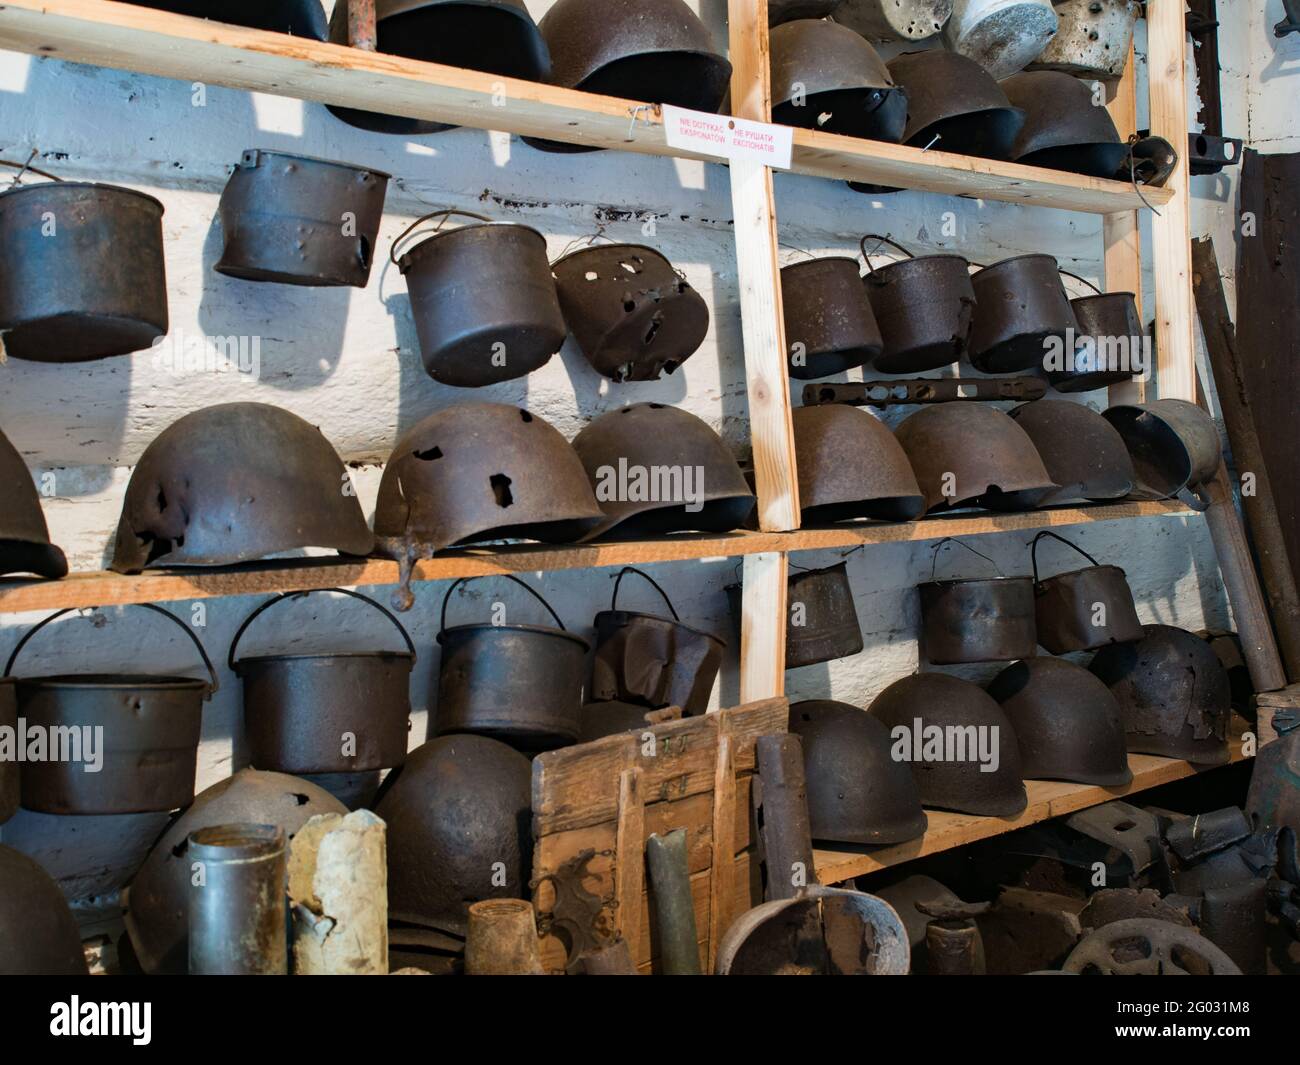 Zyndranowa, Poland - August 13, 2017: Collection of old metal helmets, vessels and other war accessories at the Lemko culture museum Stock Photo